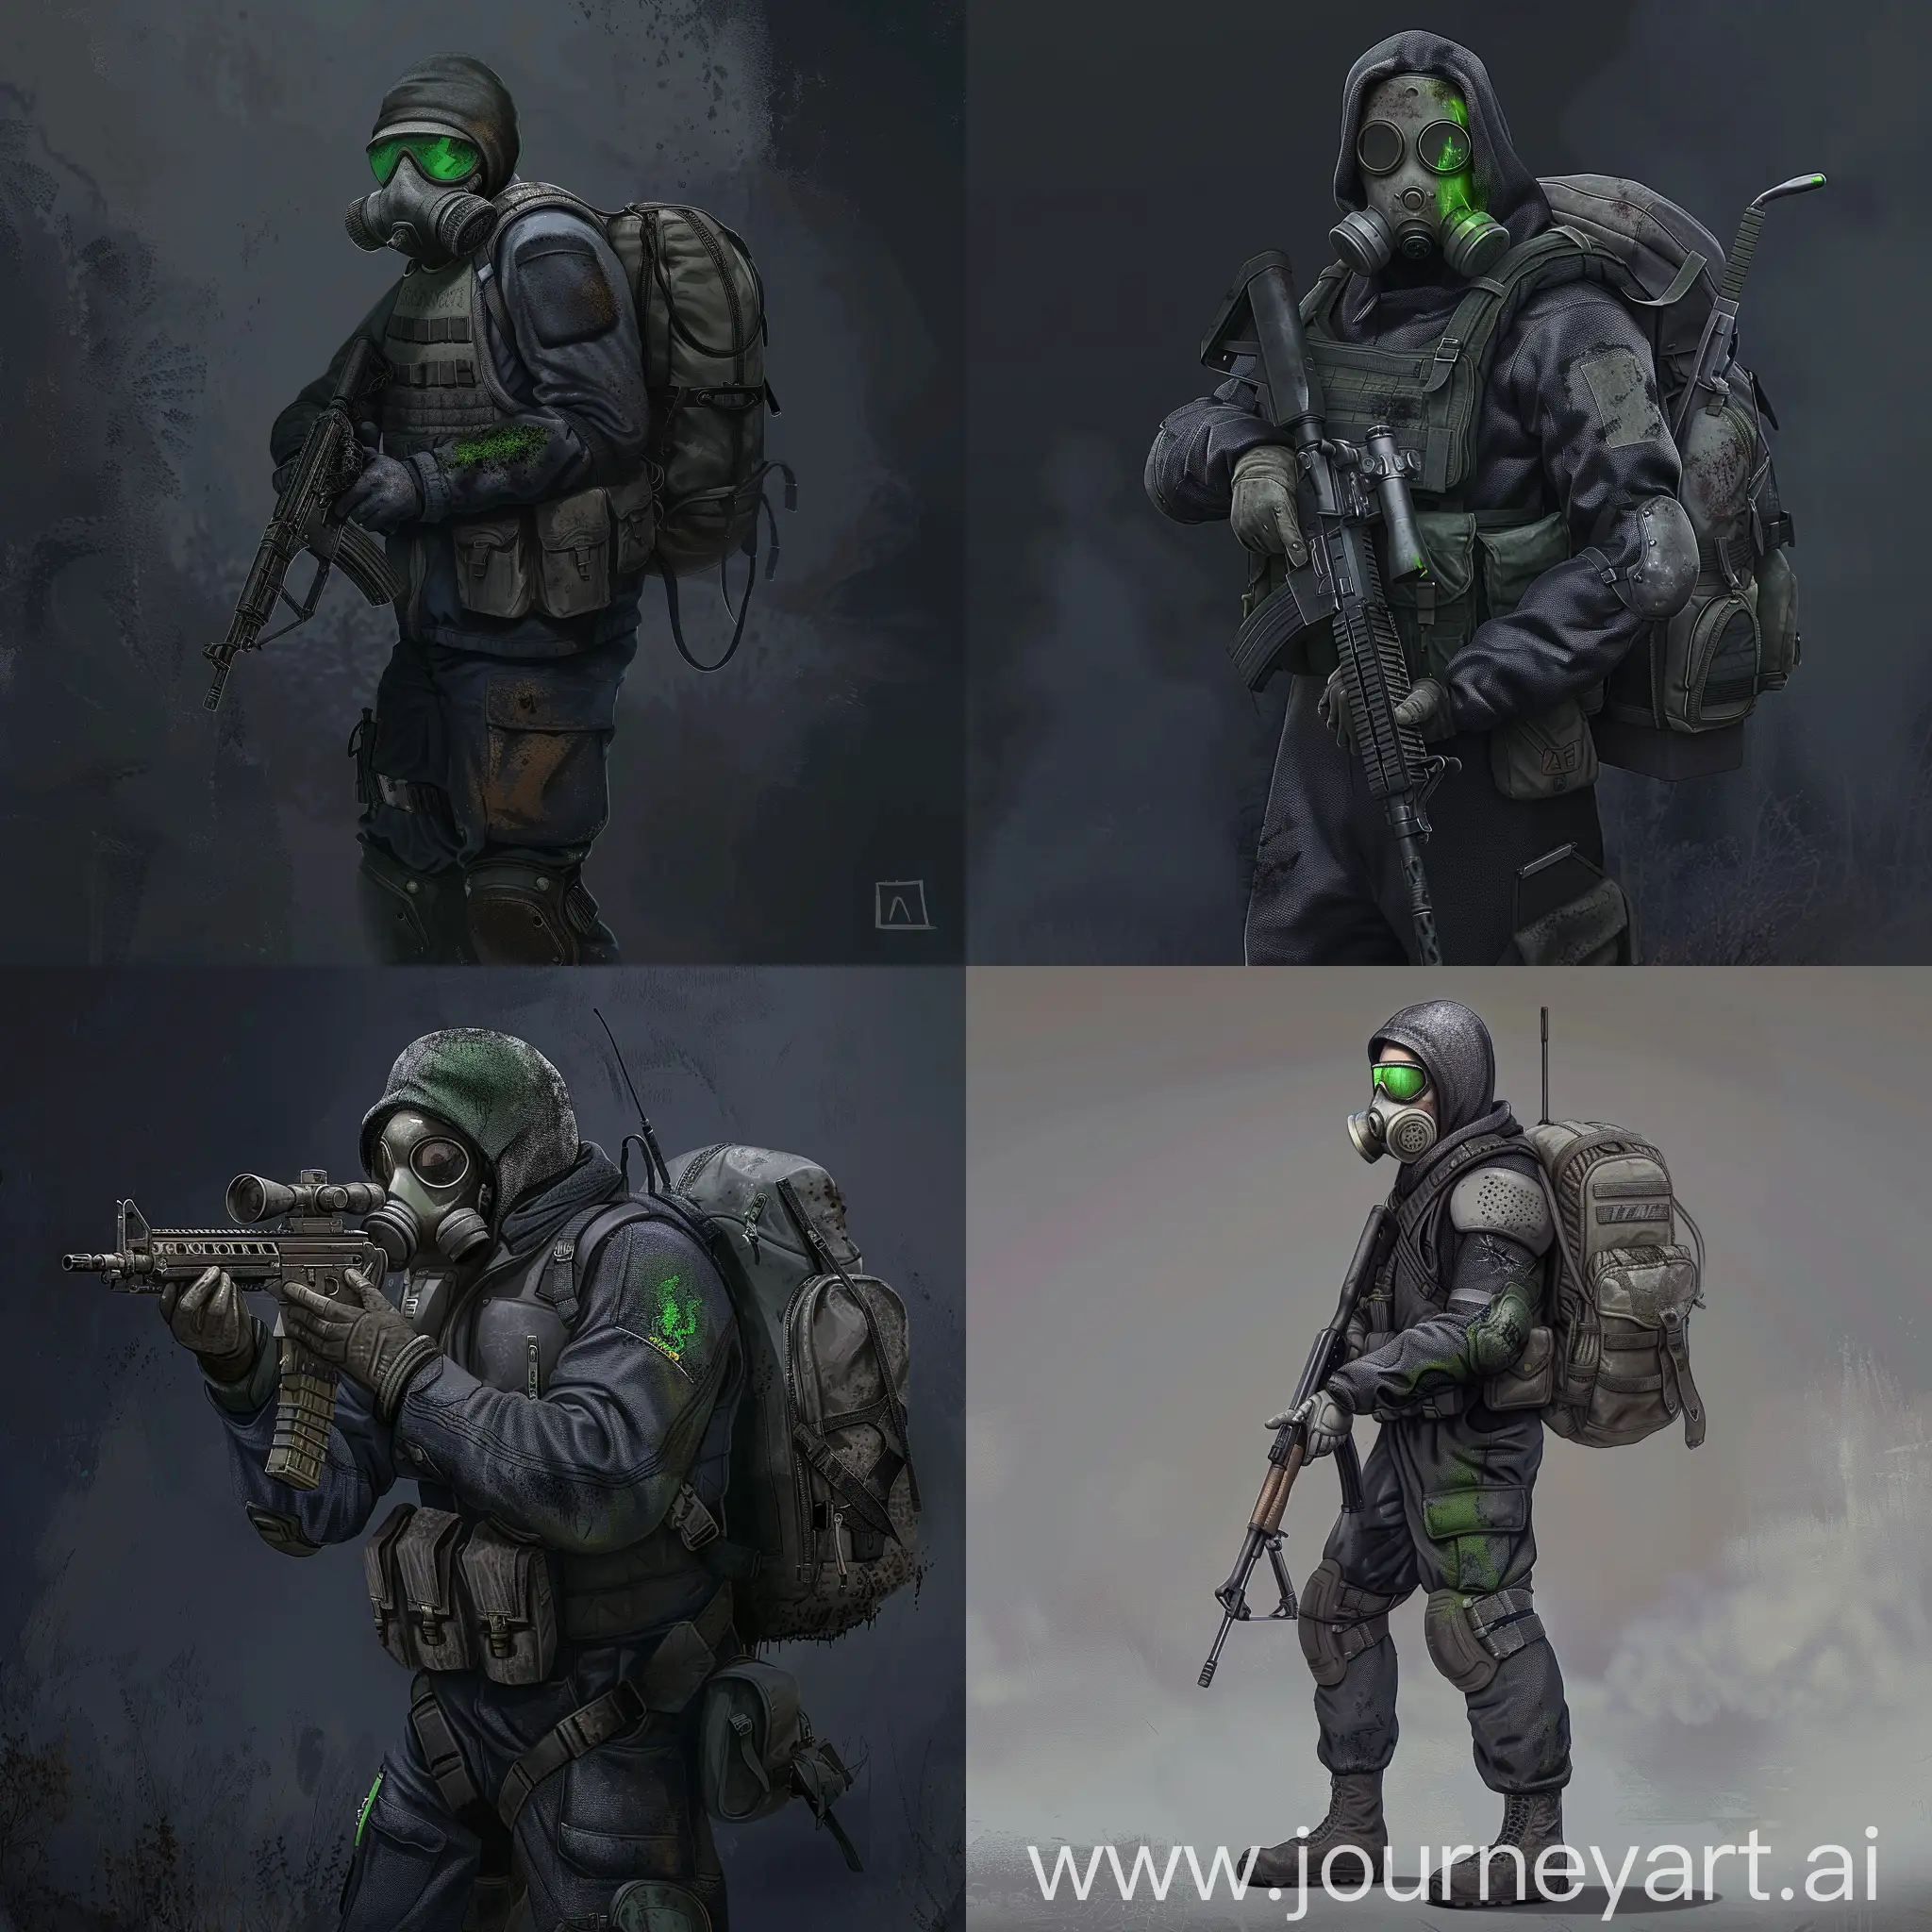 Digital art of a mercenary from the universe of S.T.A.L.K.E.R., dressed in a dark blue military jumpsuit, gray military armor on his body, a gas mask on his face, a backpack on the back, a rifle in the hands of a mercenary.